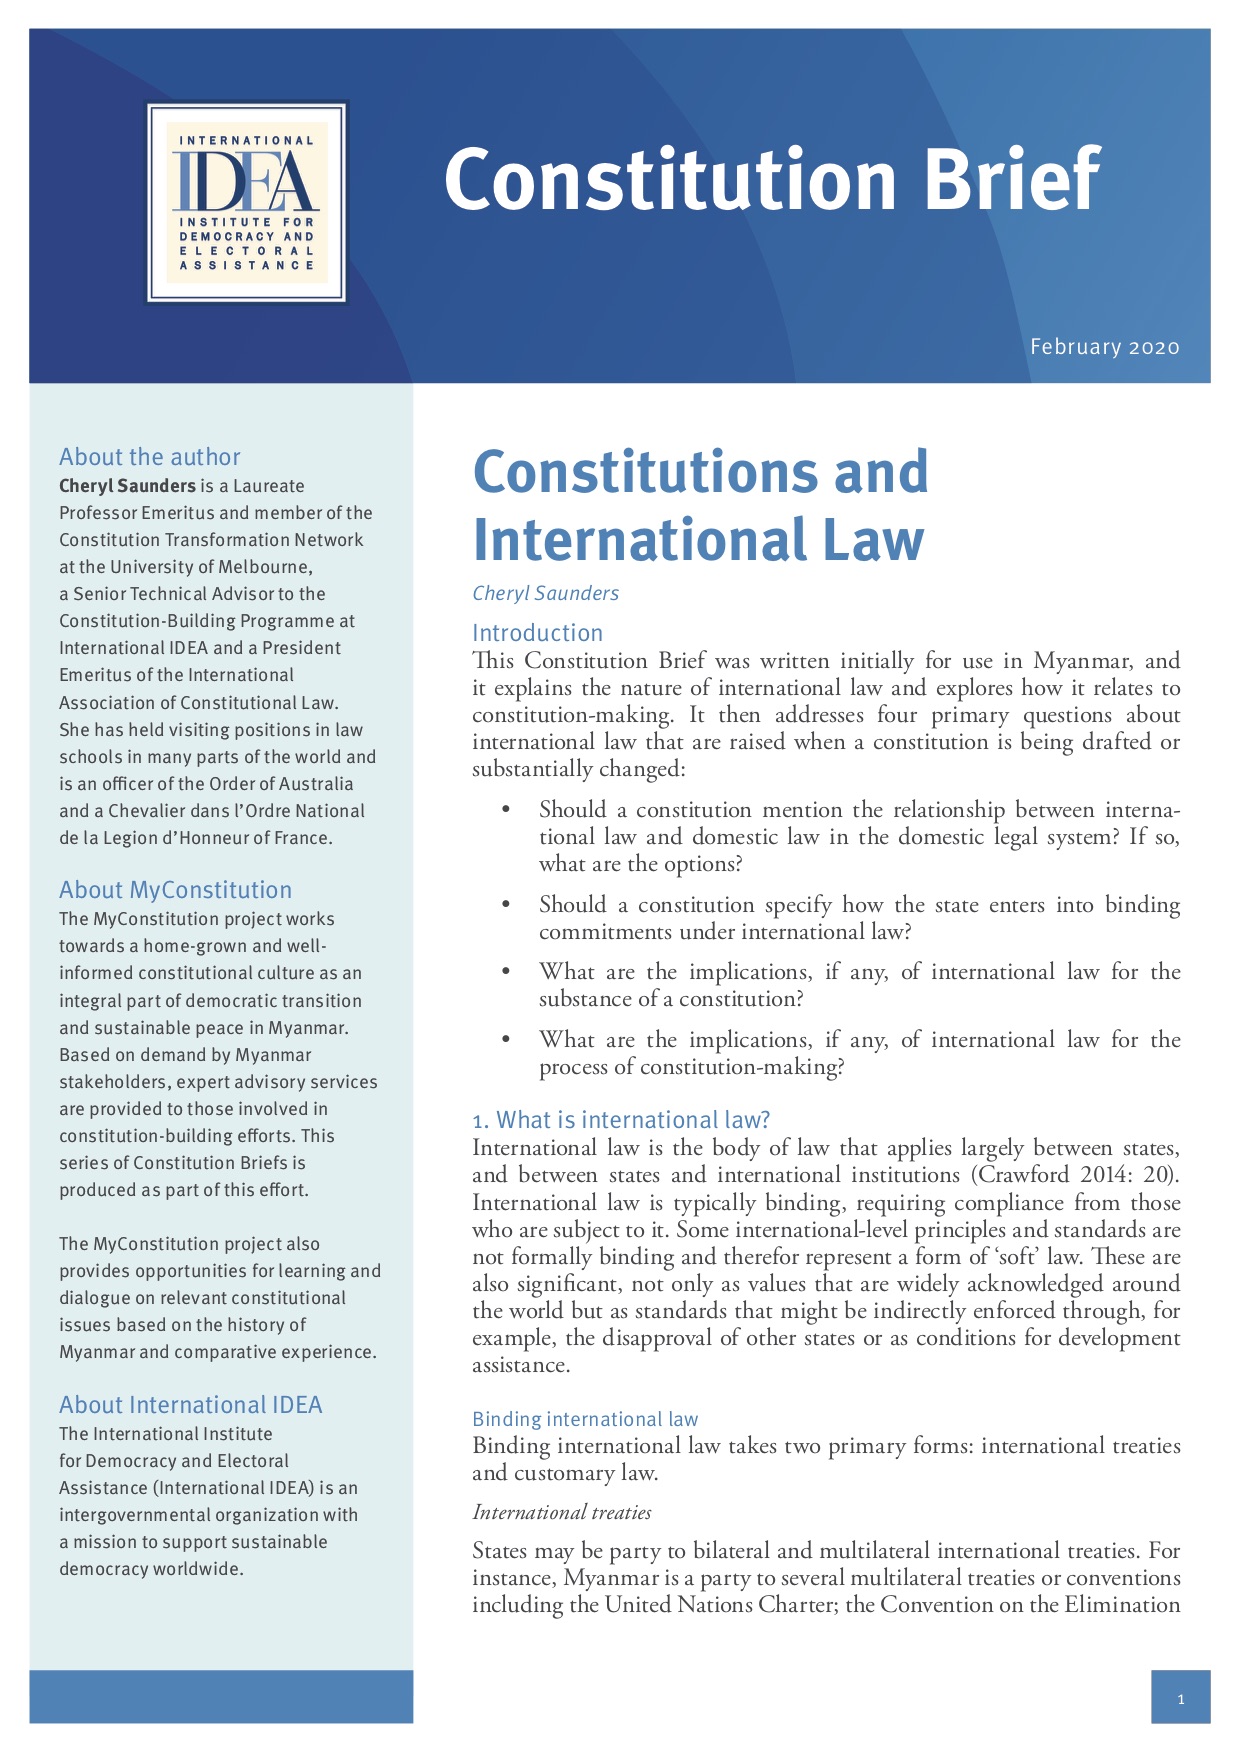 Constitutions and International Law